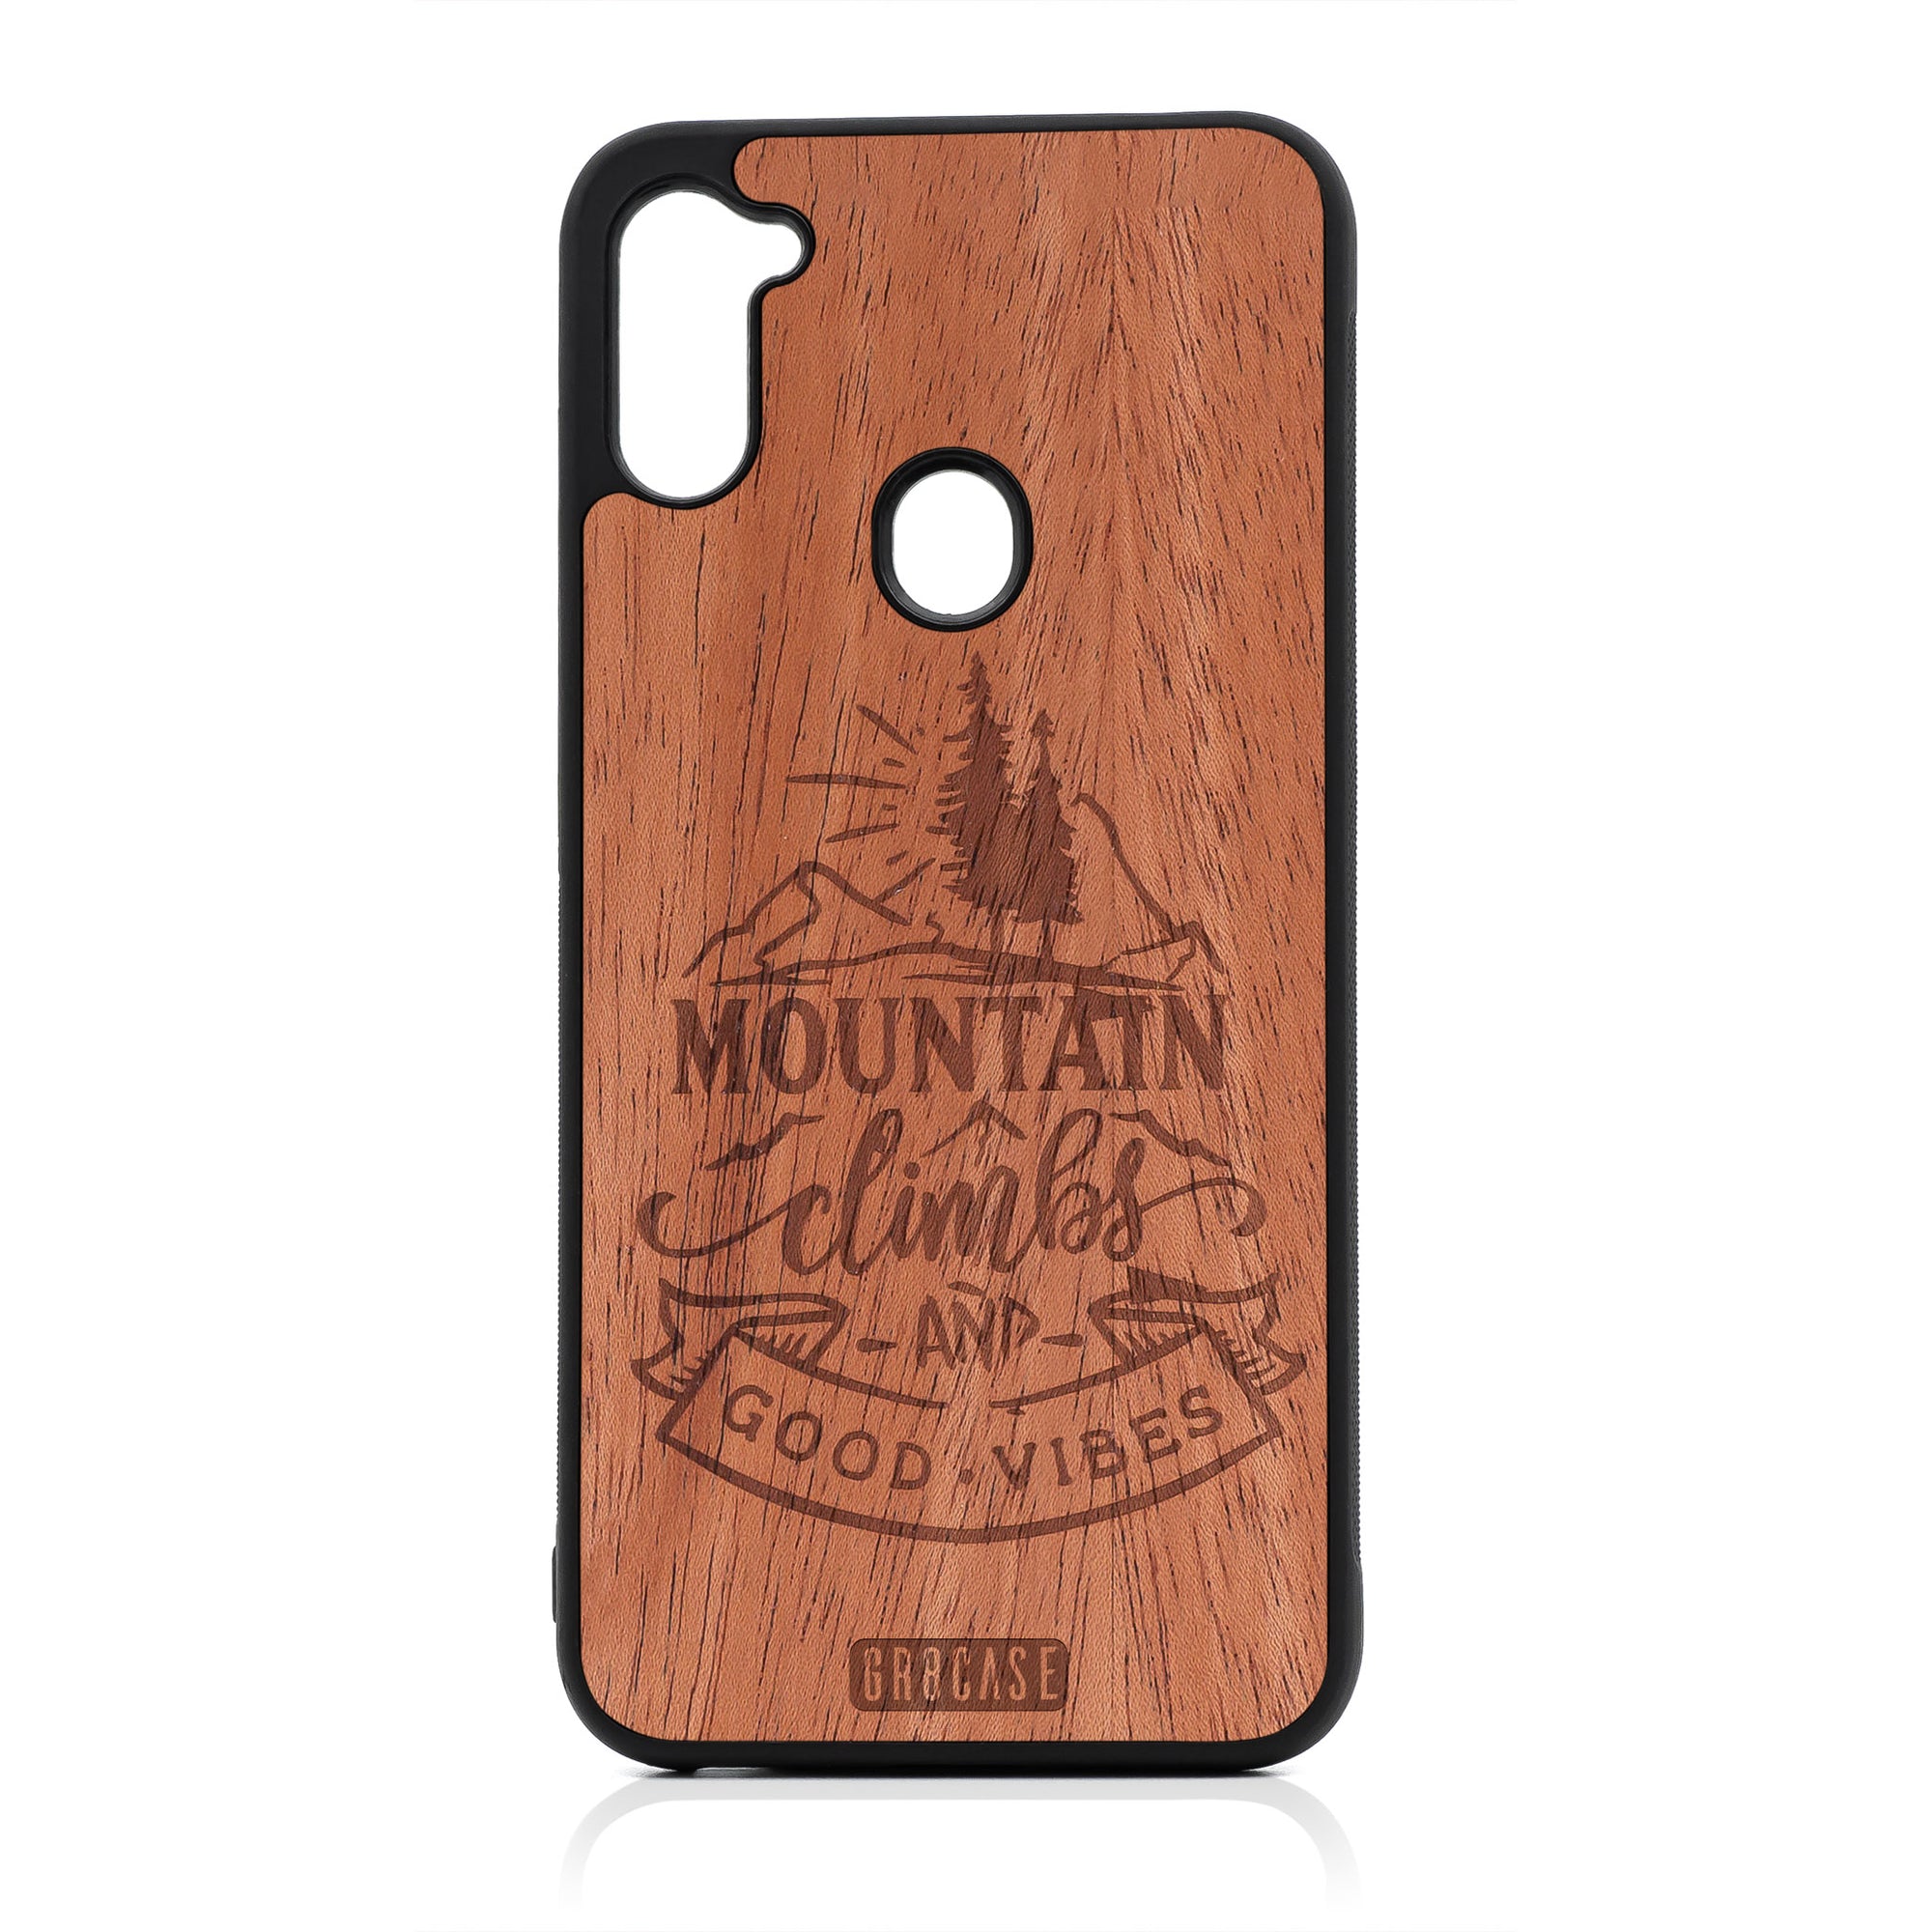 Mountain Climb And Good Vibes Design Wood Case For Samsung Galaxy A11